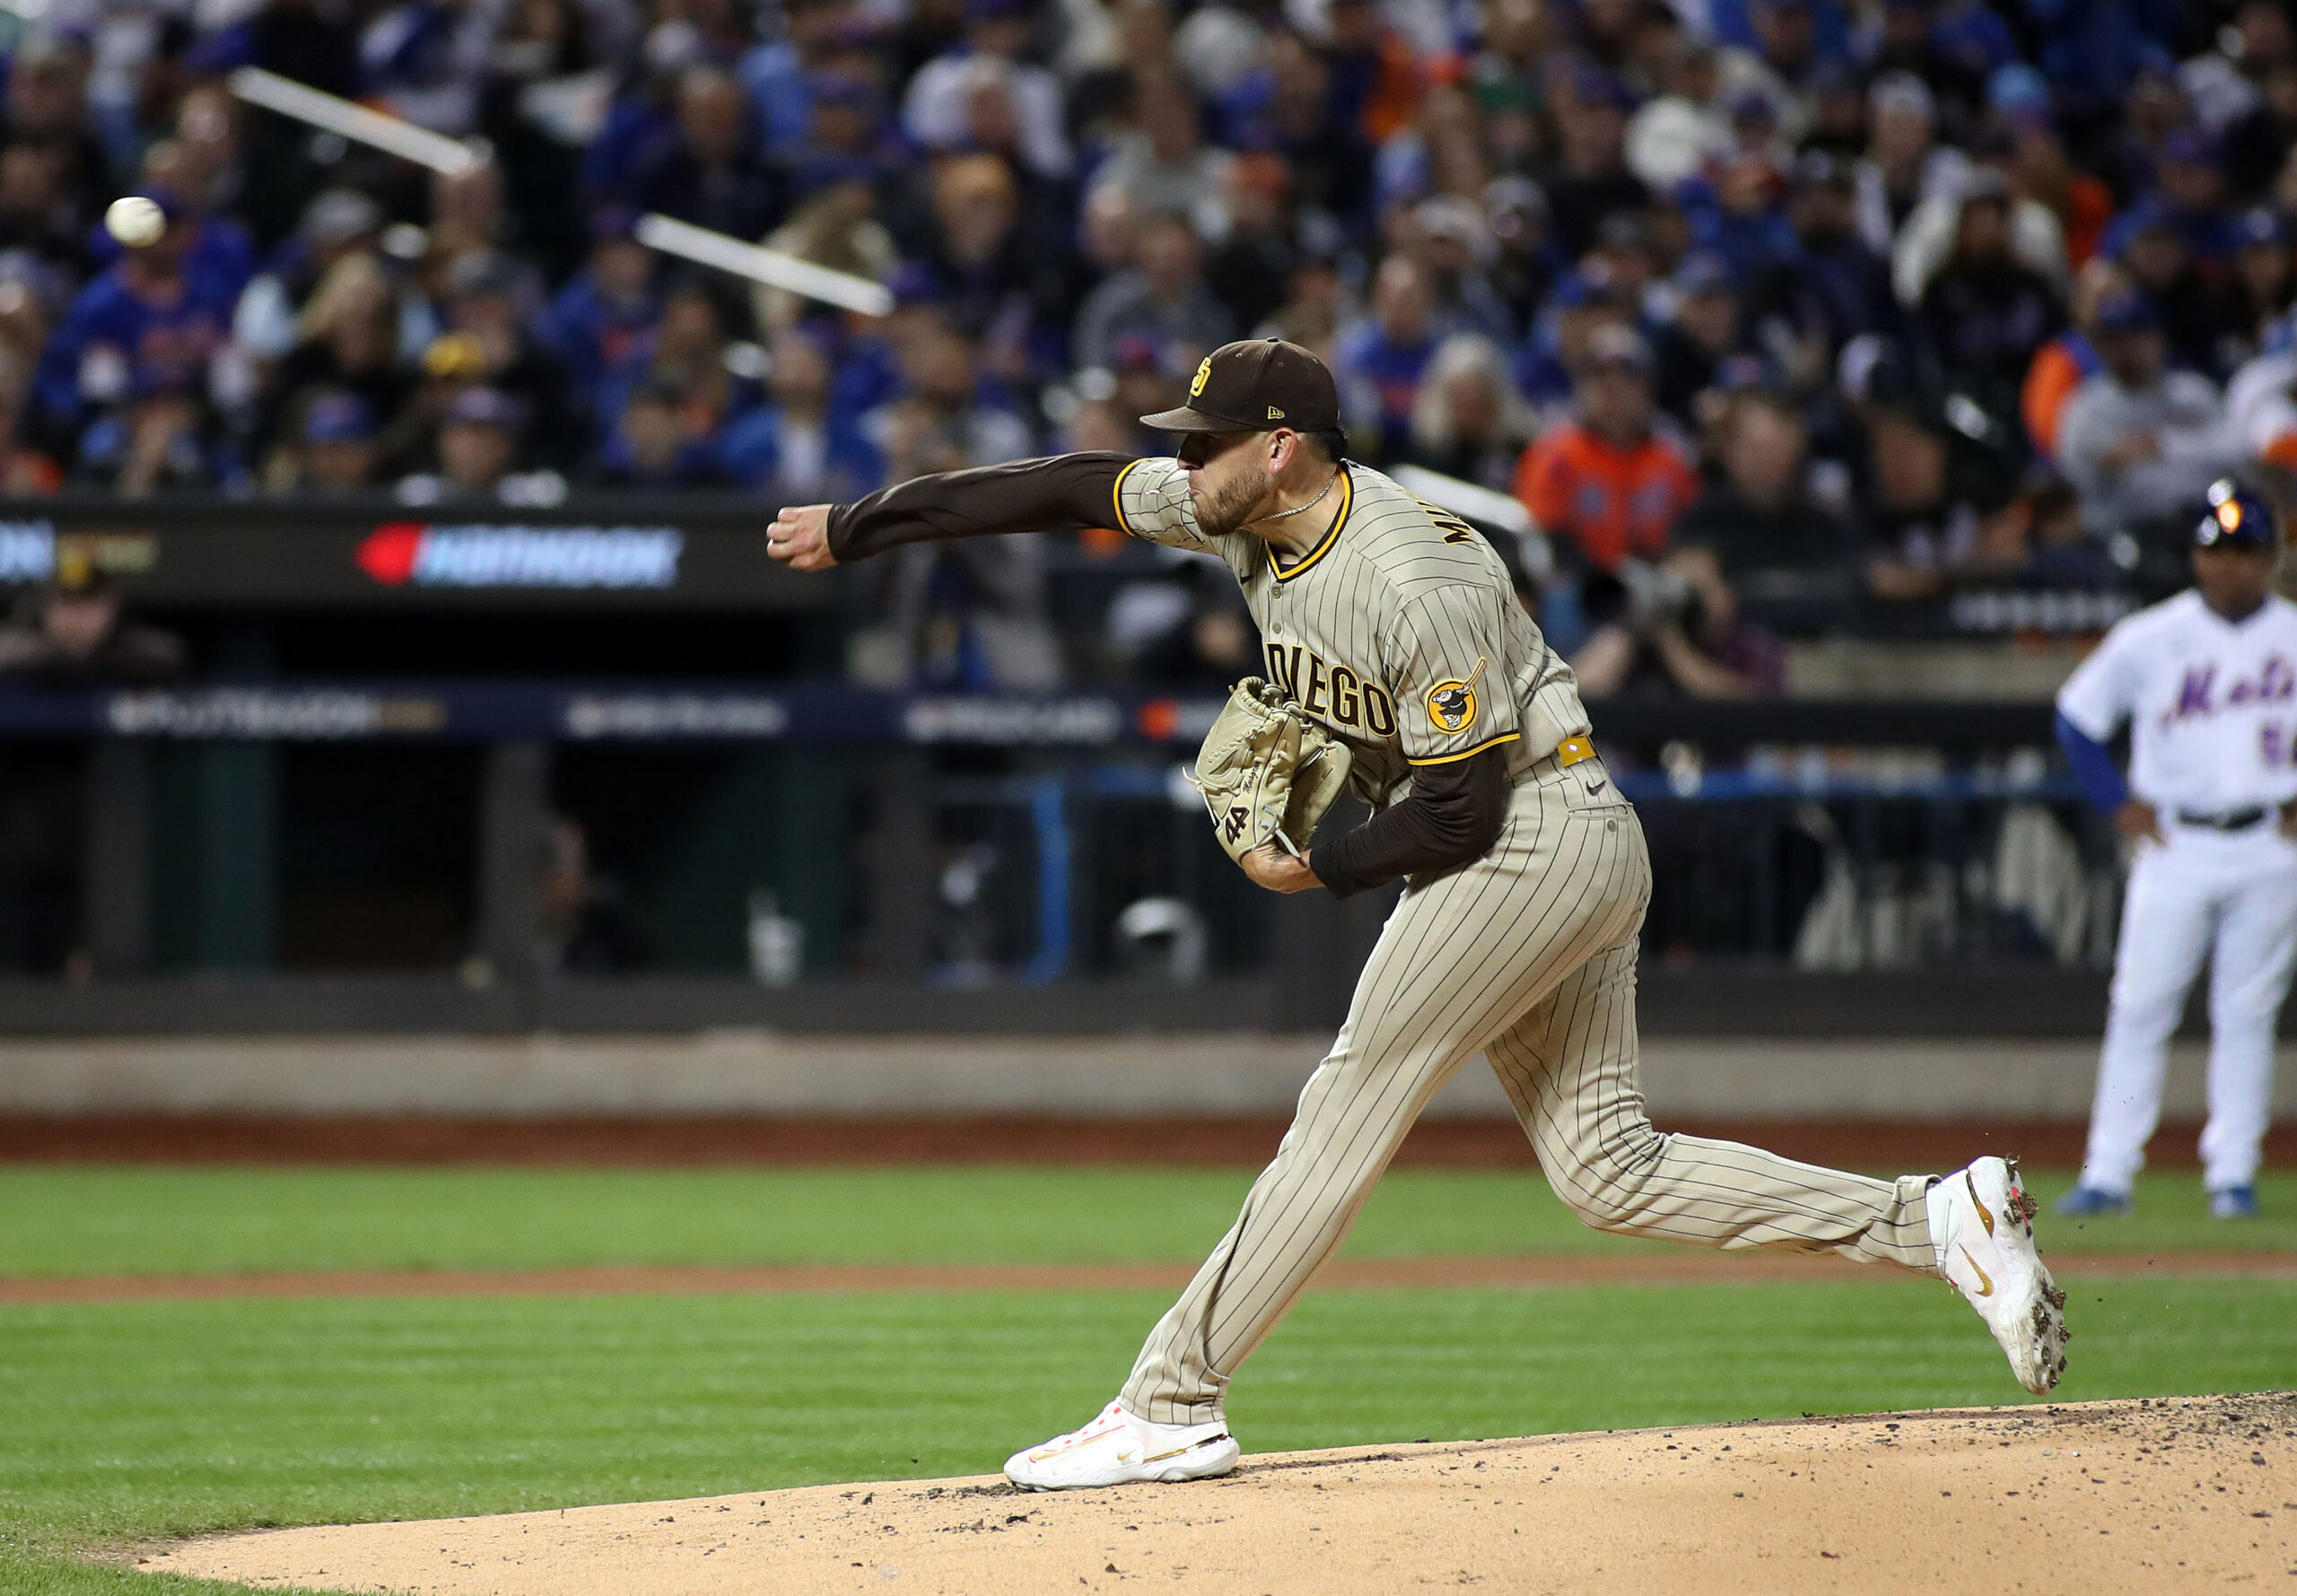 Padres 'ear-itate' Mets with perfect night, advance to NLDS